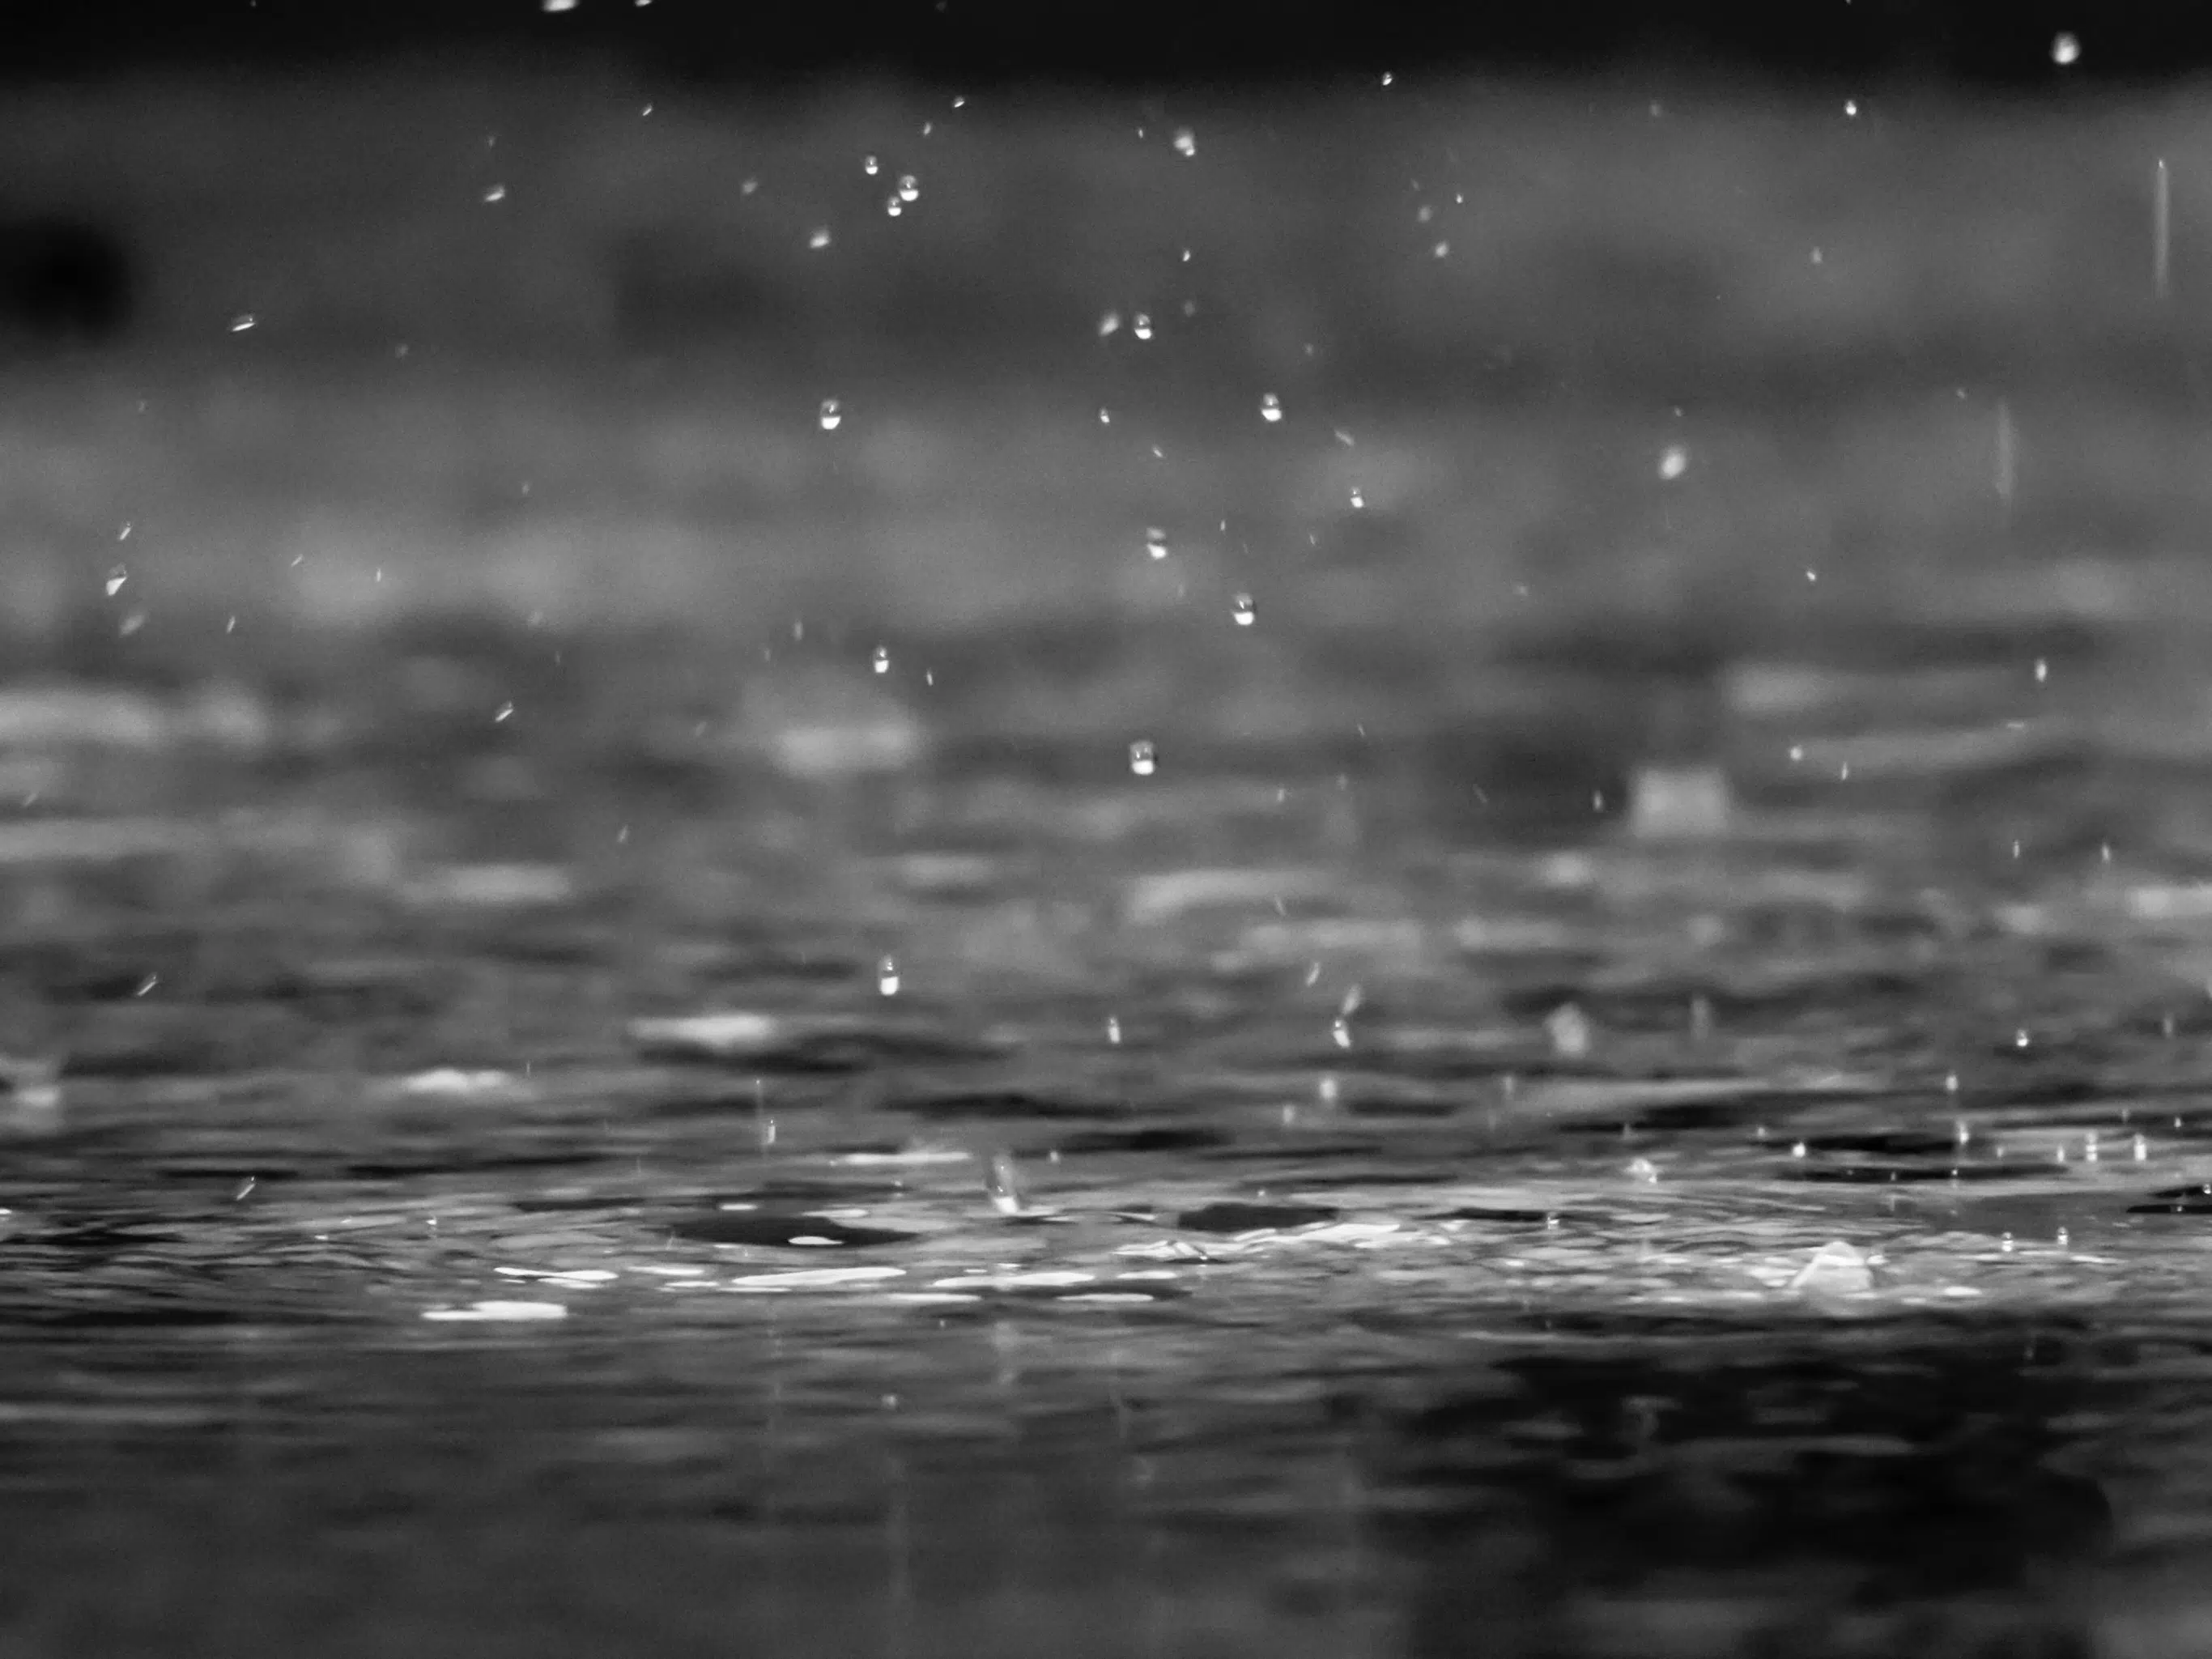 Rainfall warning in effect - another 20mm possible